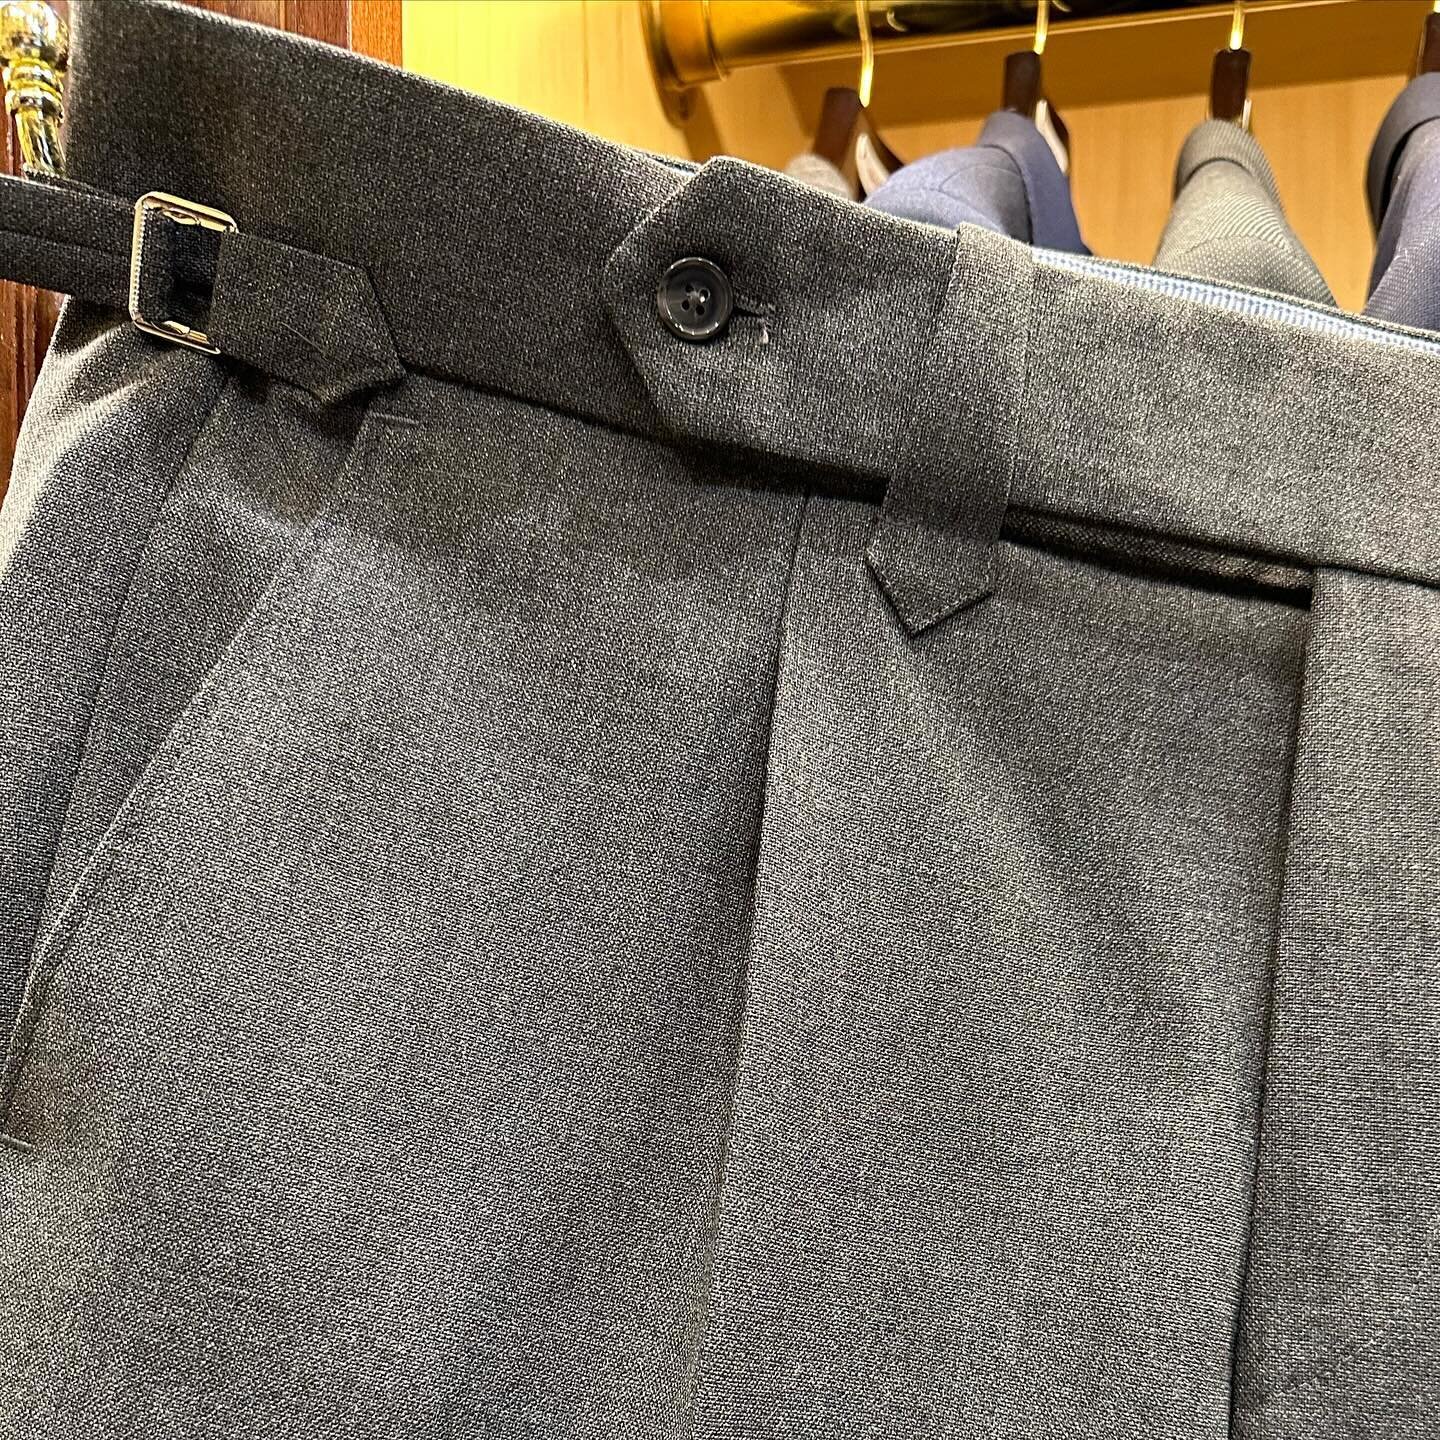 Details on these made to measure Fimeresco material trousers.
- Extra deep waistband 
- Extended waistband
- Side adjusters 
- Large front belt loop
- Single pleats
- Back pocket with flap 
- Candy stripe interior

Fabric by @harrisons1863 - Finmeres